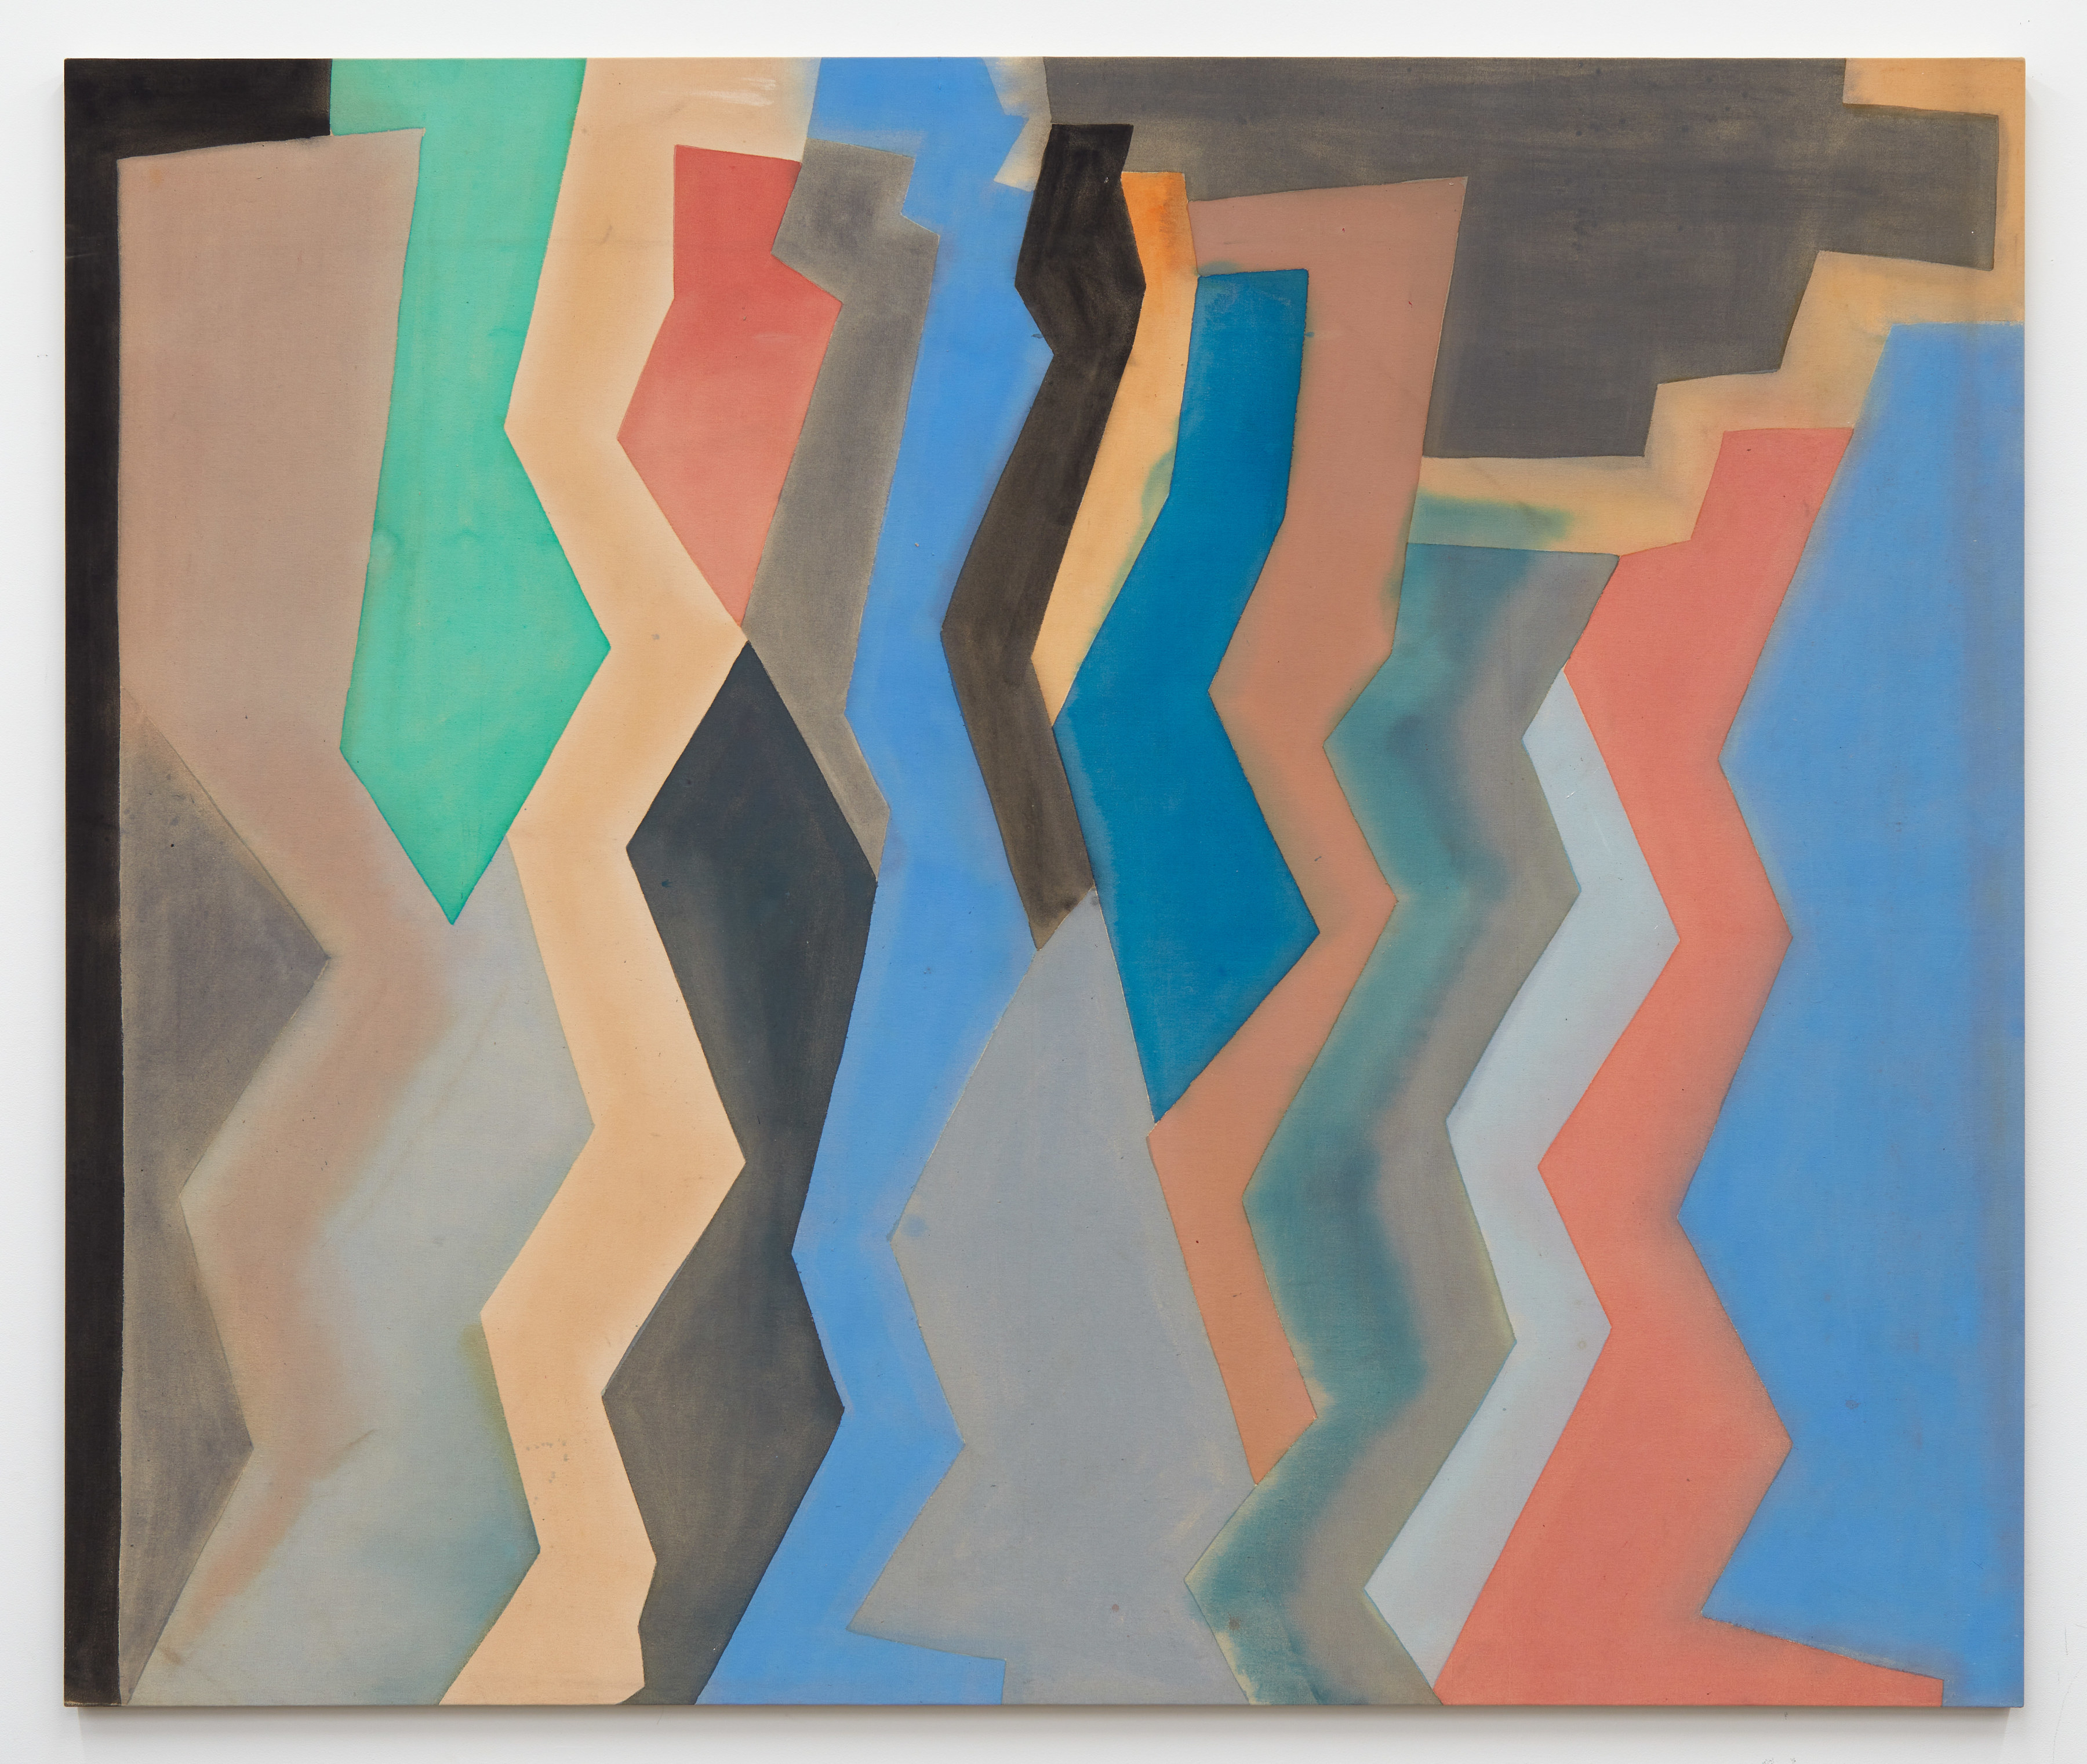 The Prospects of Painting: Robert Duran’s New York Years - Features - Independent Art Fair